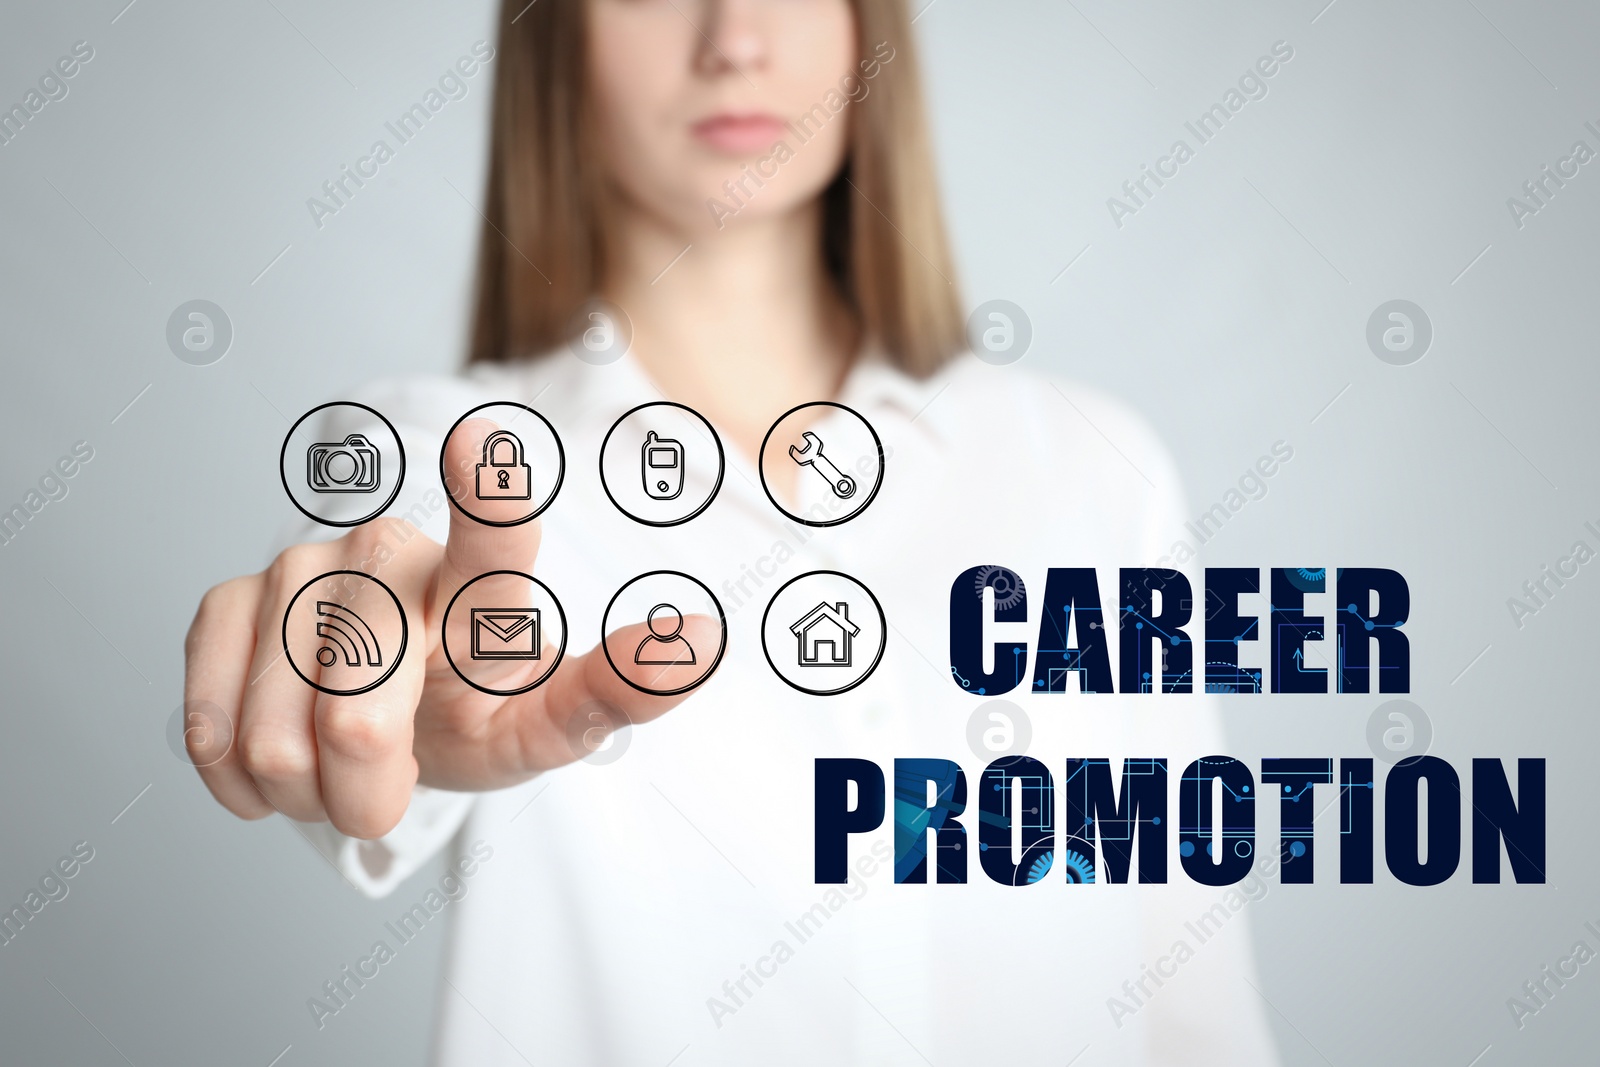 Image of Career promotion concept. Woman touching icon on virtual screen